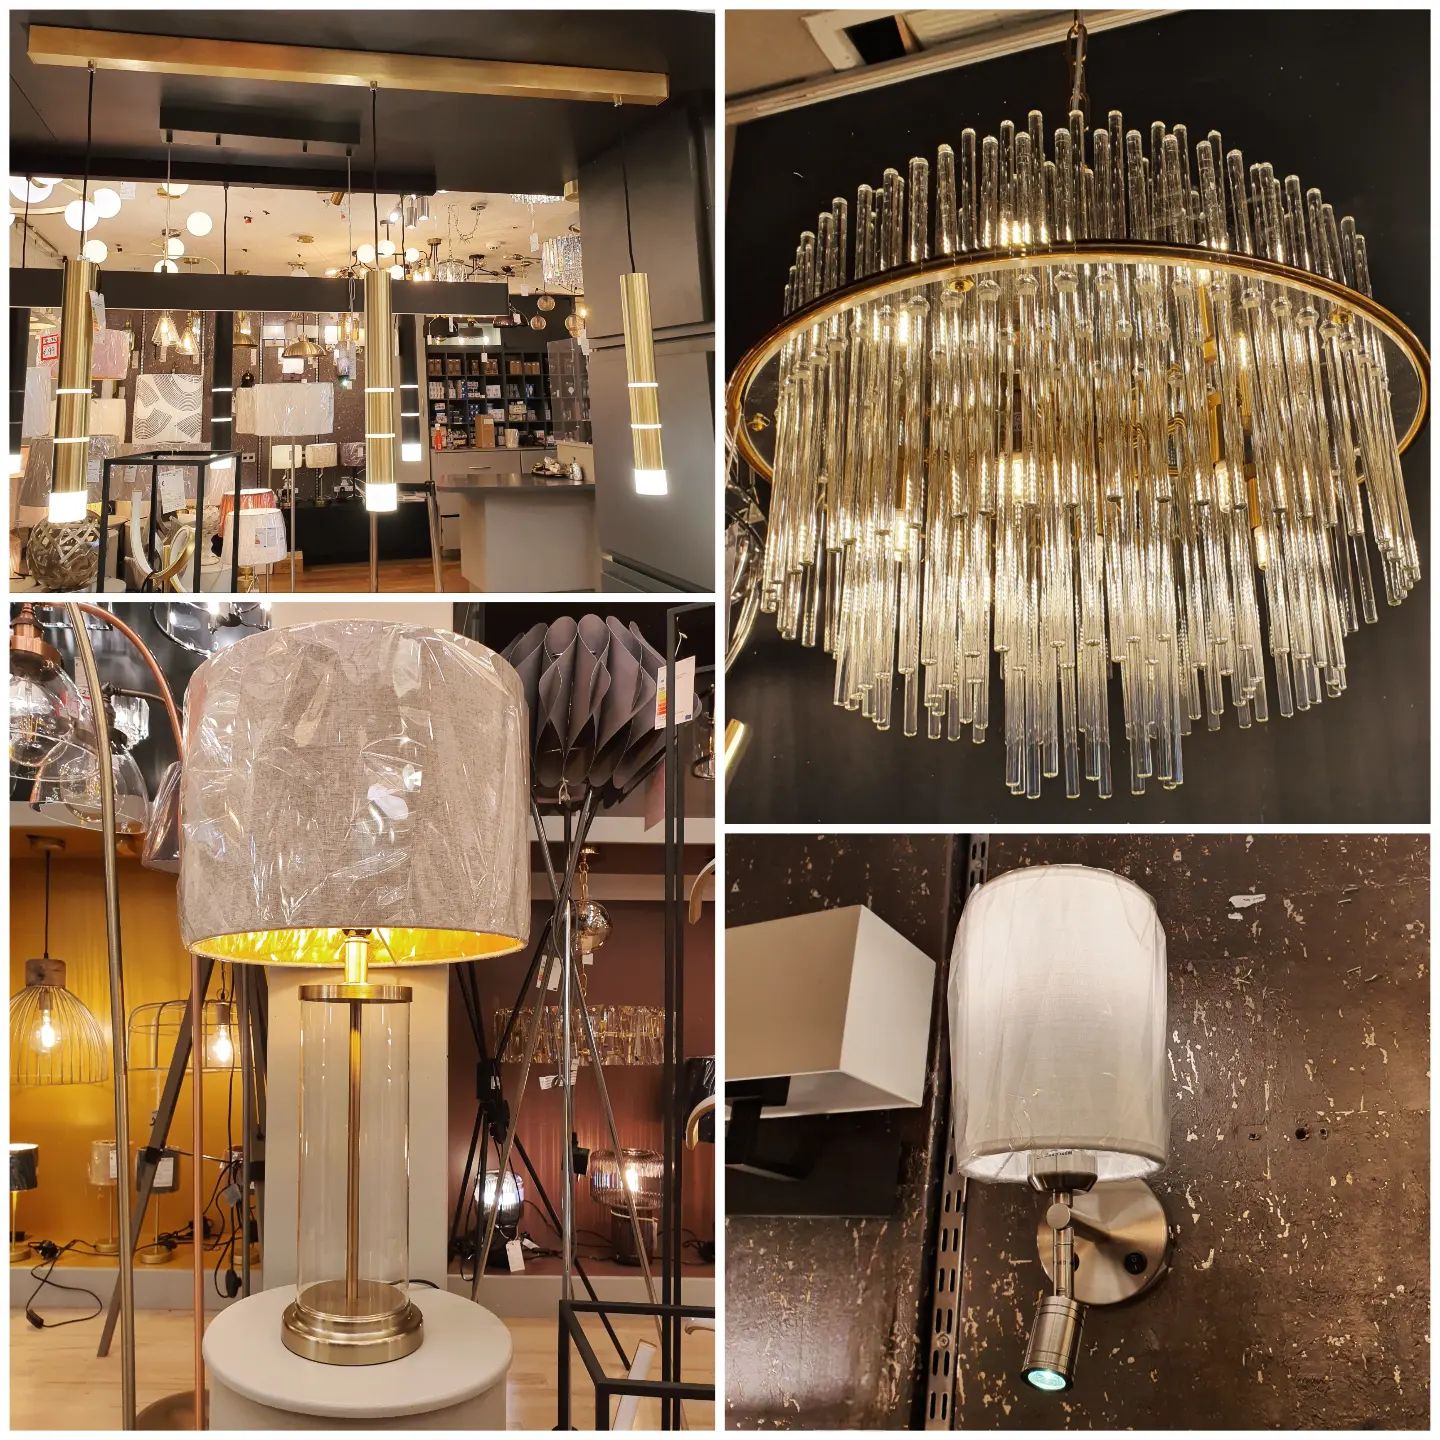 Some of our beautiful lighting available today in-store and online at stillorgandecor.ie for delivery nationwide. 💡

Visit us in-store or online and start creating your dream home!